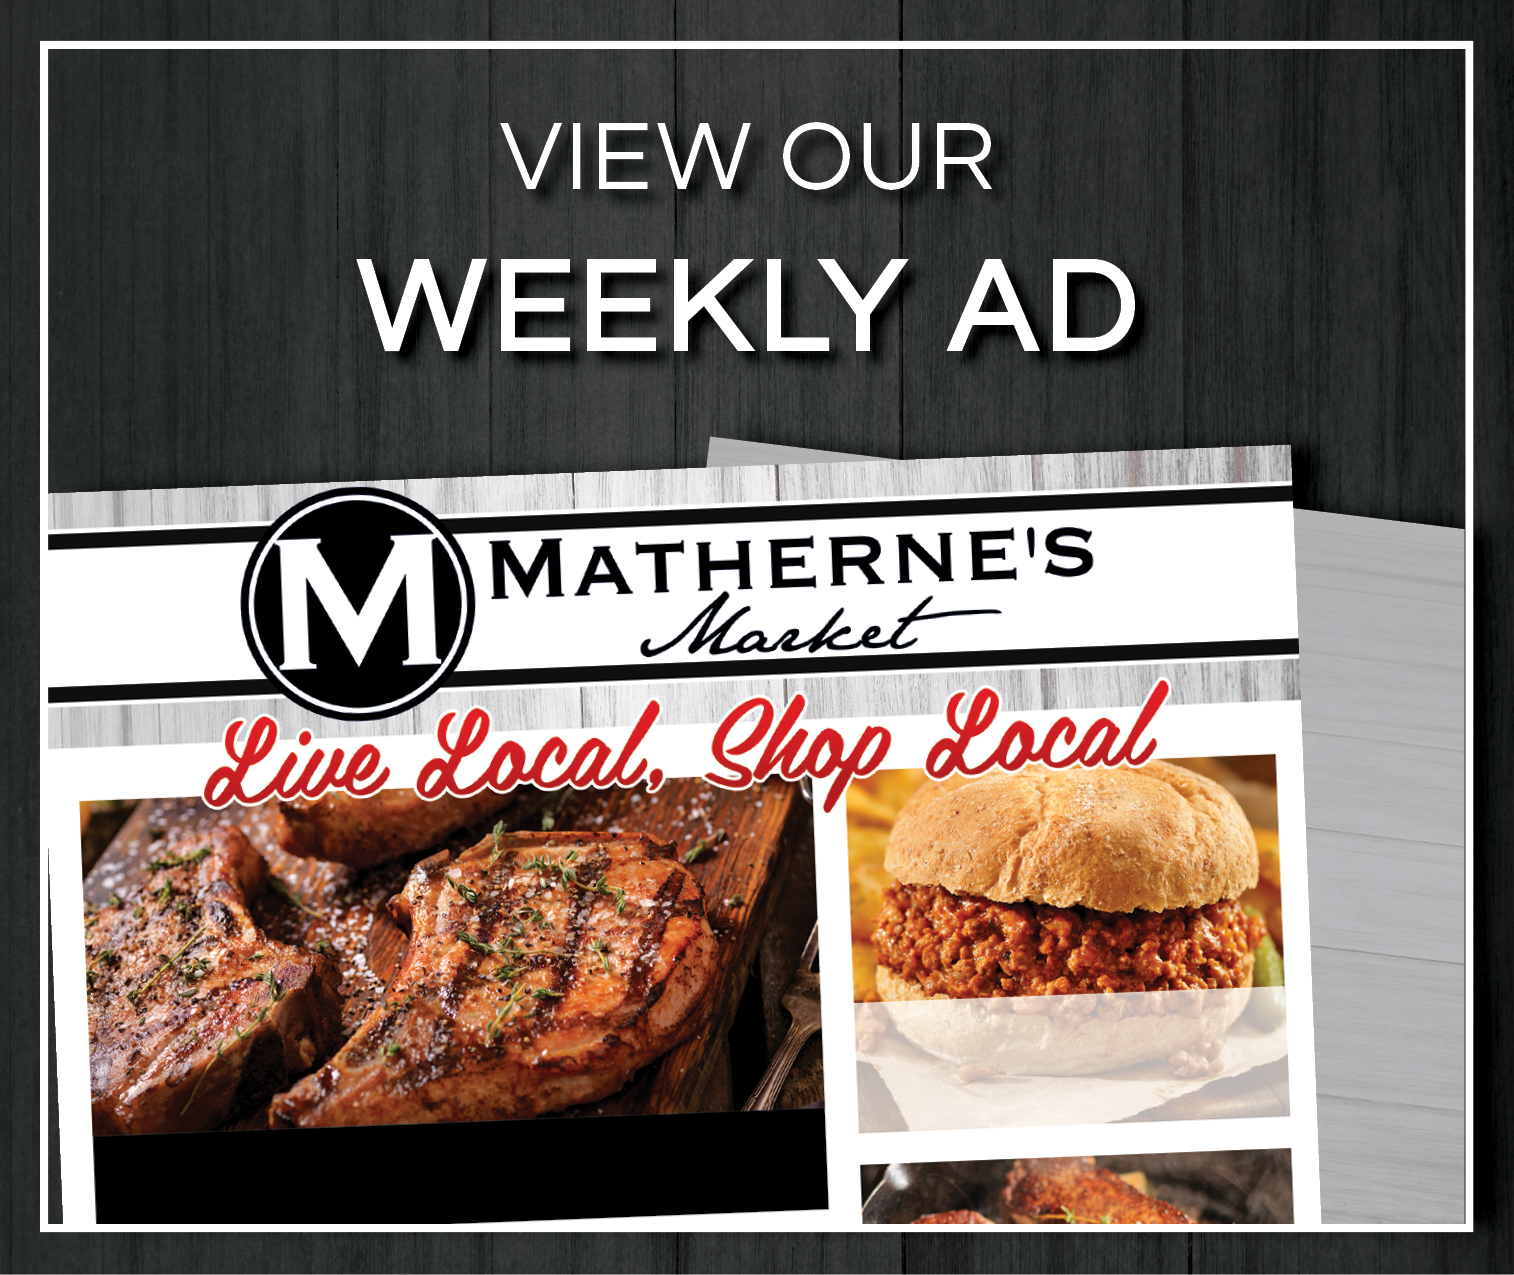 View Our Weekly Ad